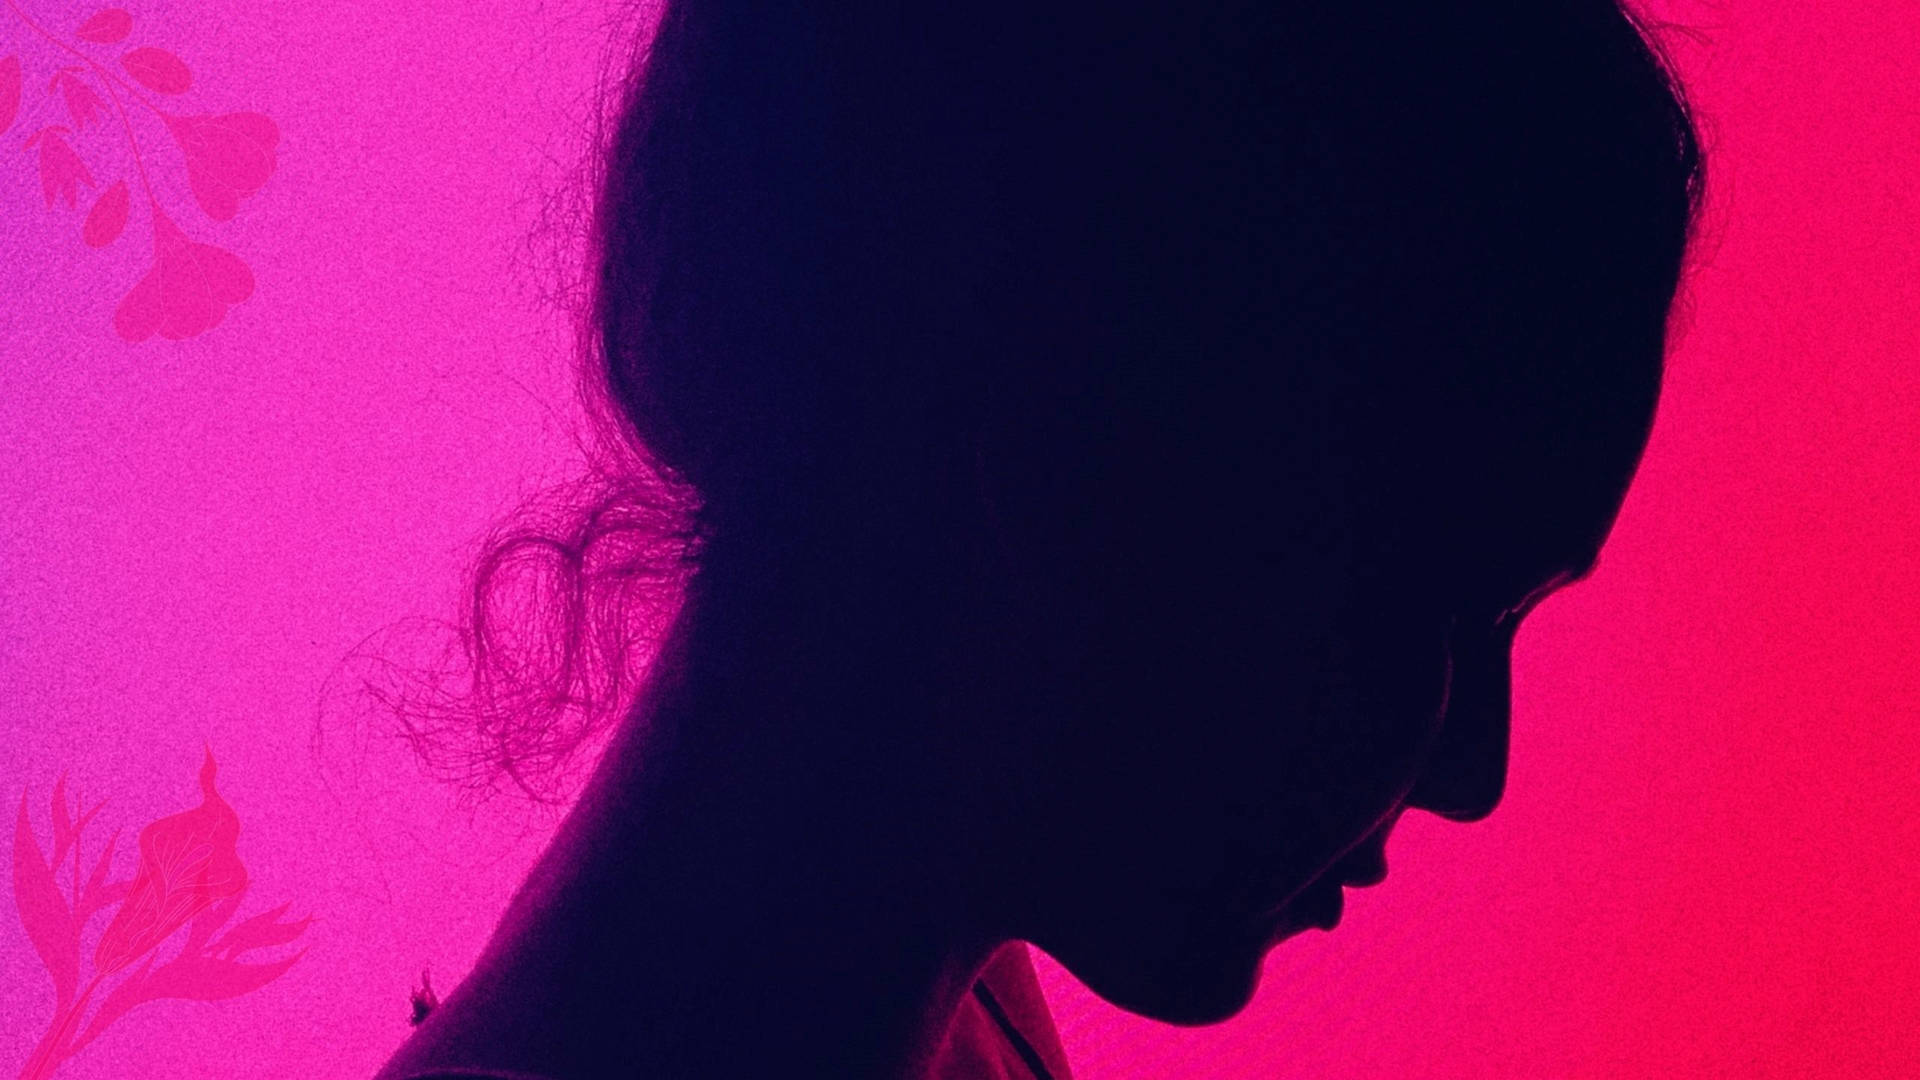 Neon Pink Aesthetic Femme Side Profile Background